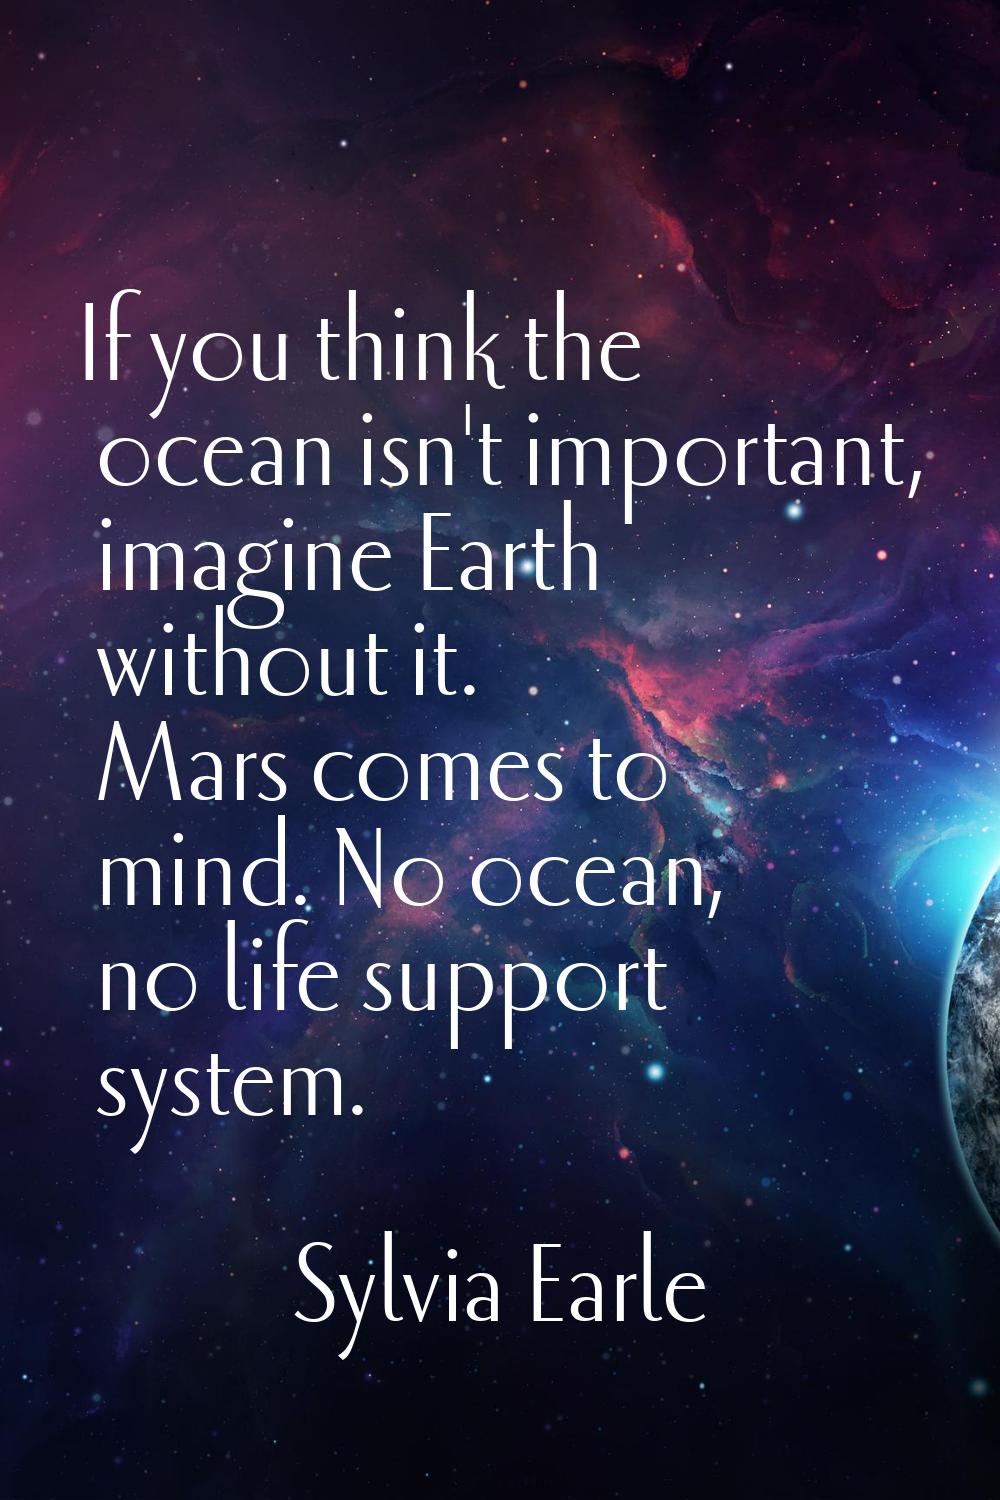 If you think the ocean isn't important, imagine Earth without it. Mars comes to mind. No ocean, no 